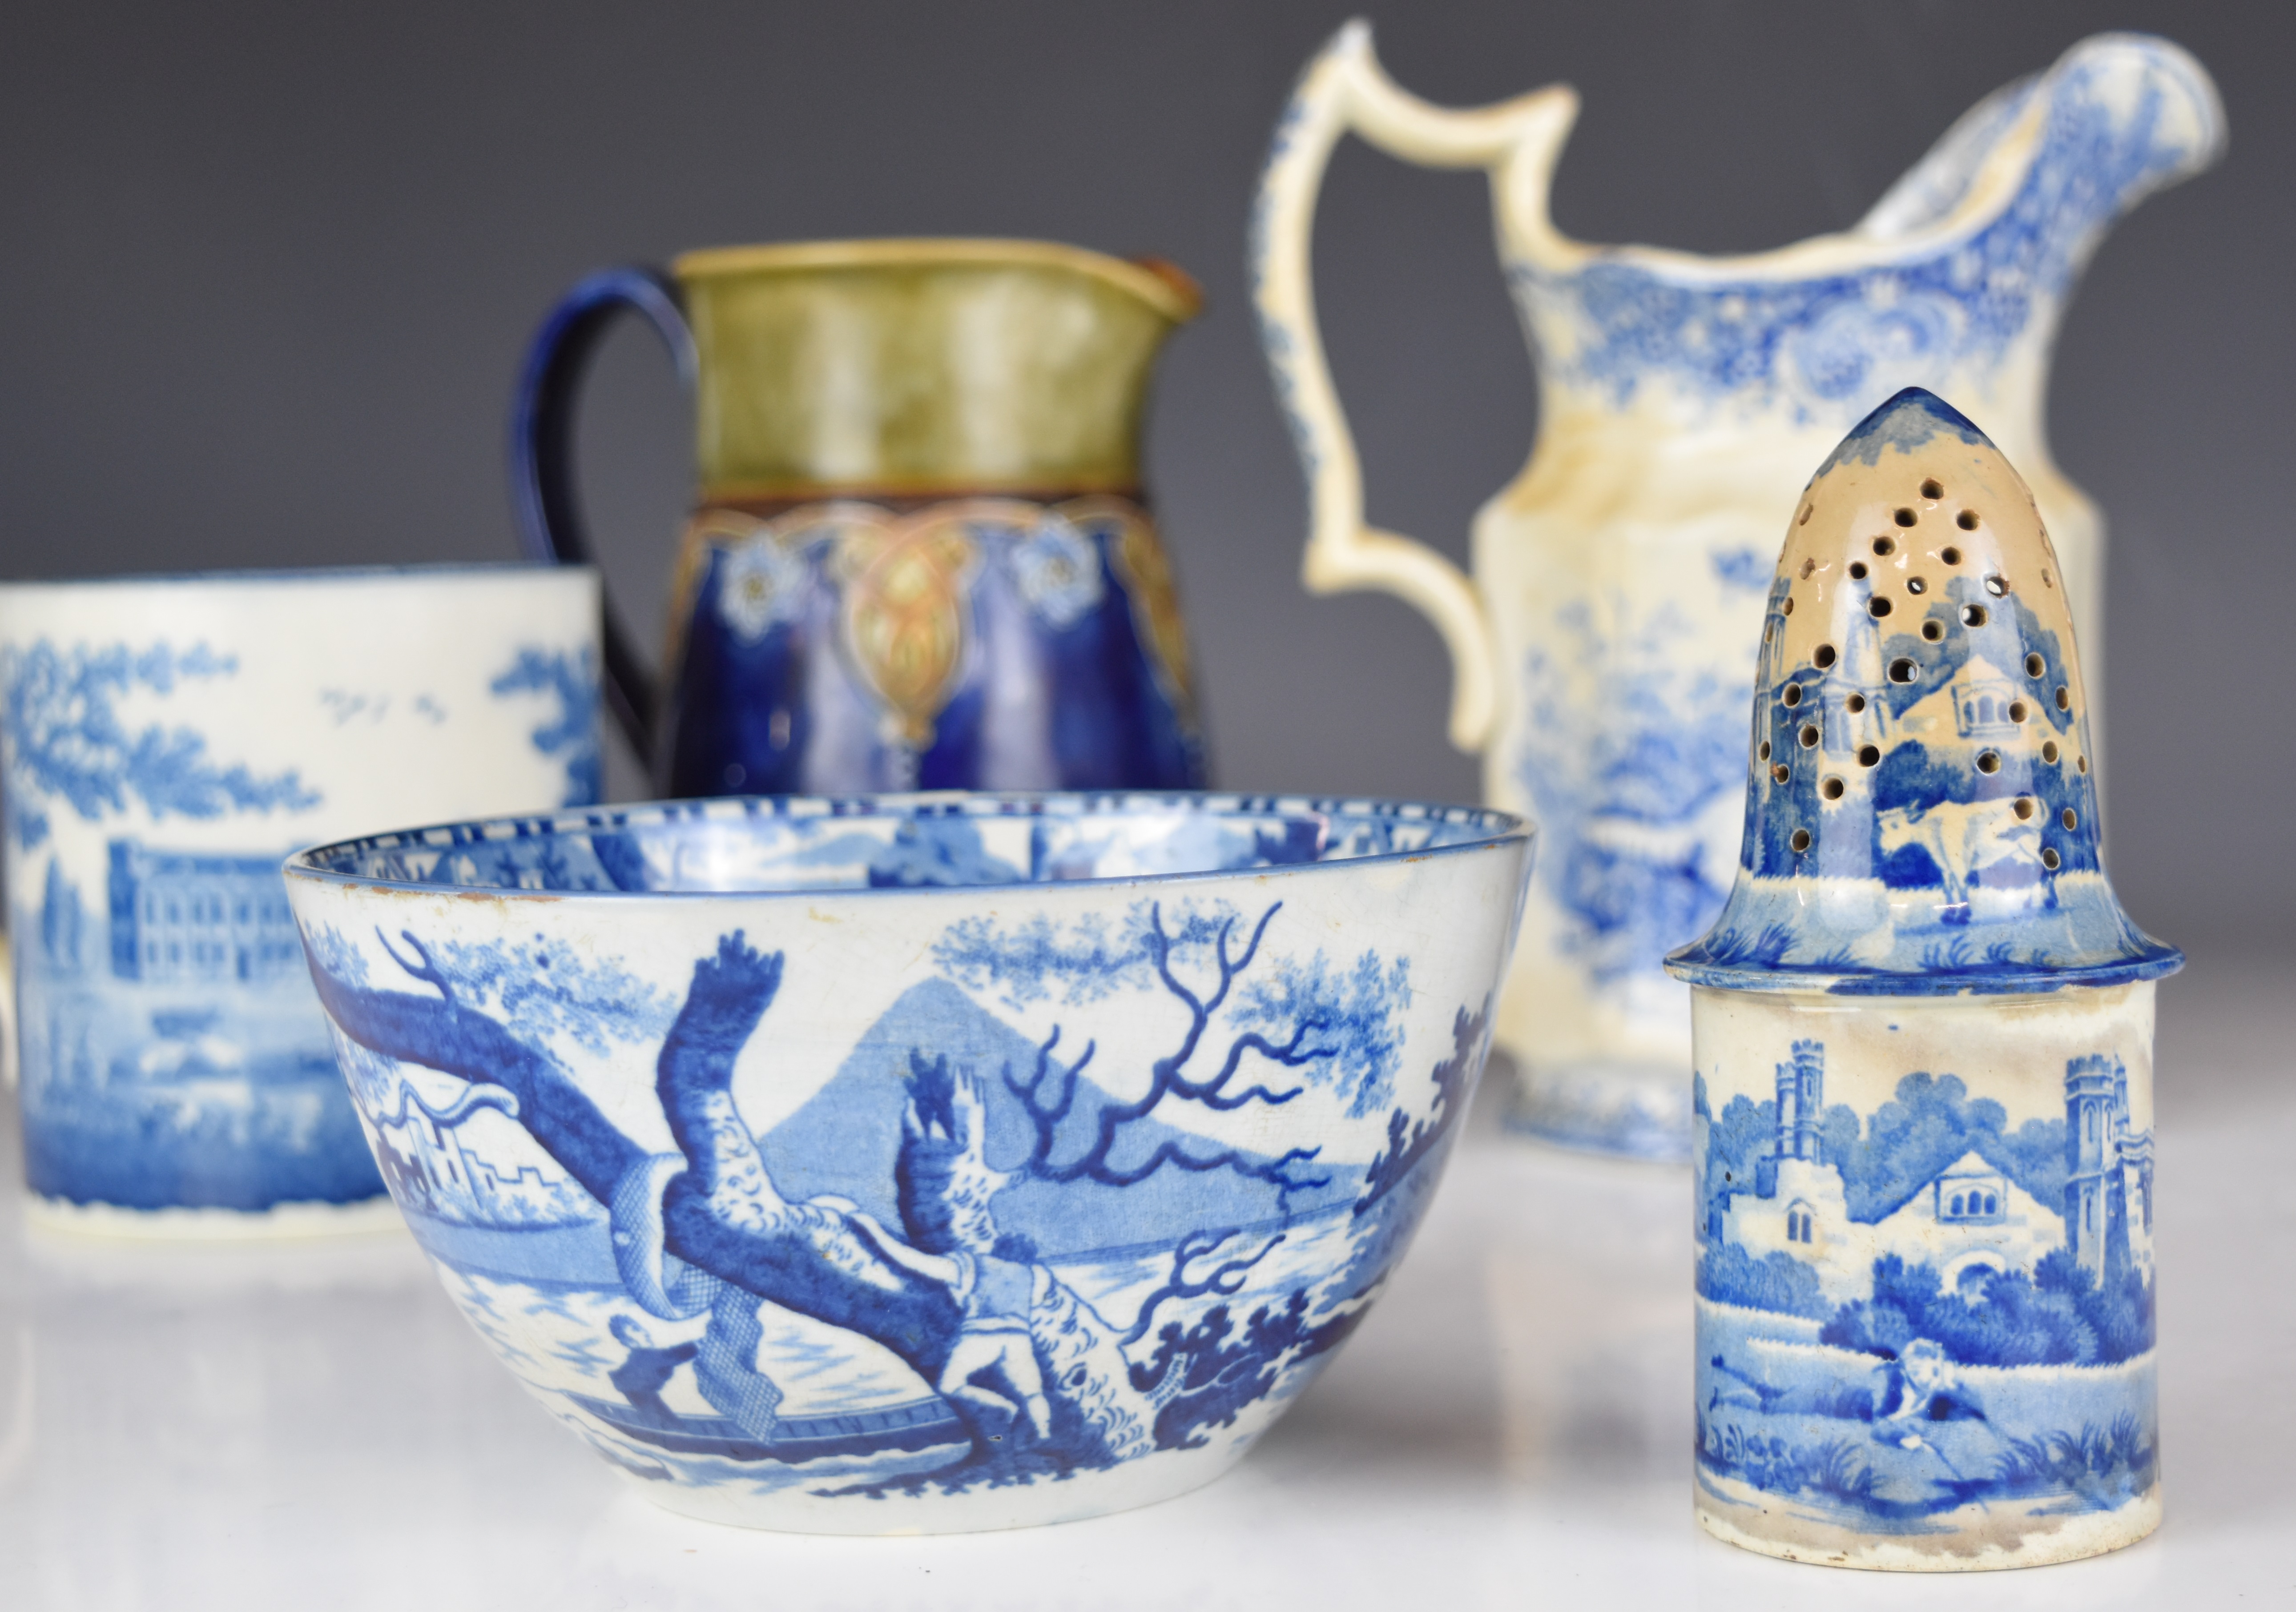 19thC blue and white transfer printed ware including a sifter, large tankard, jug with sporting - Image 4 of 8